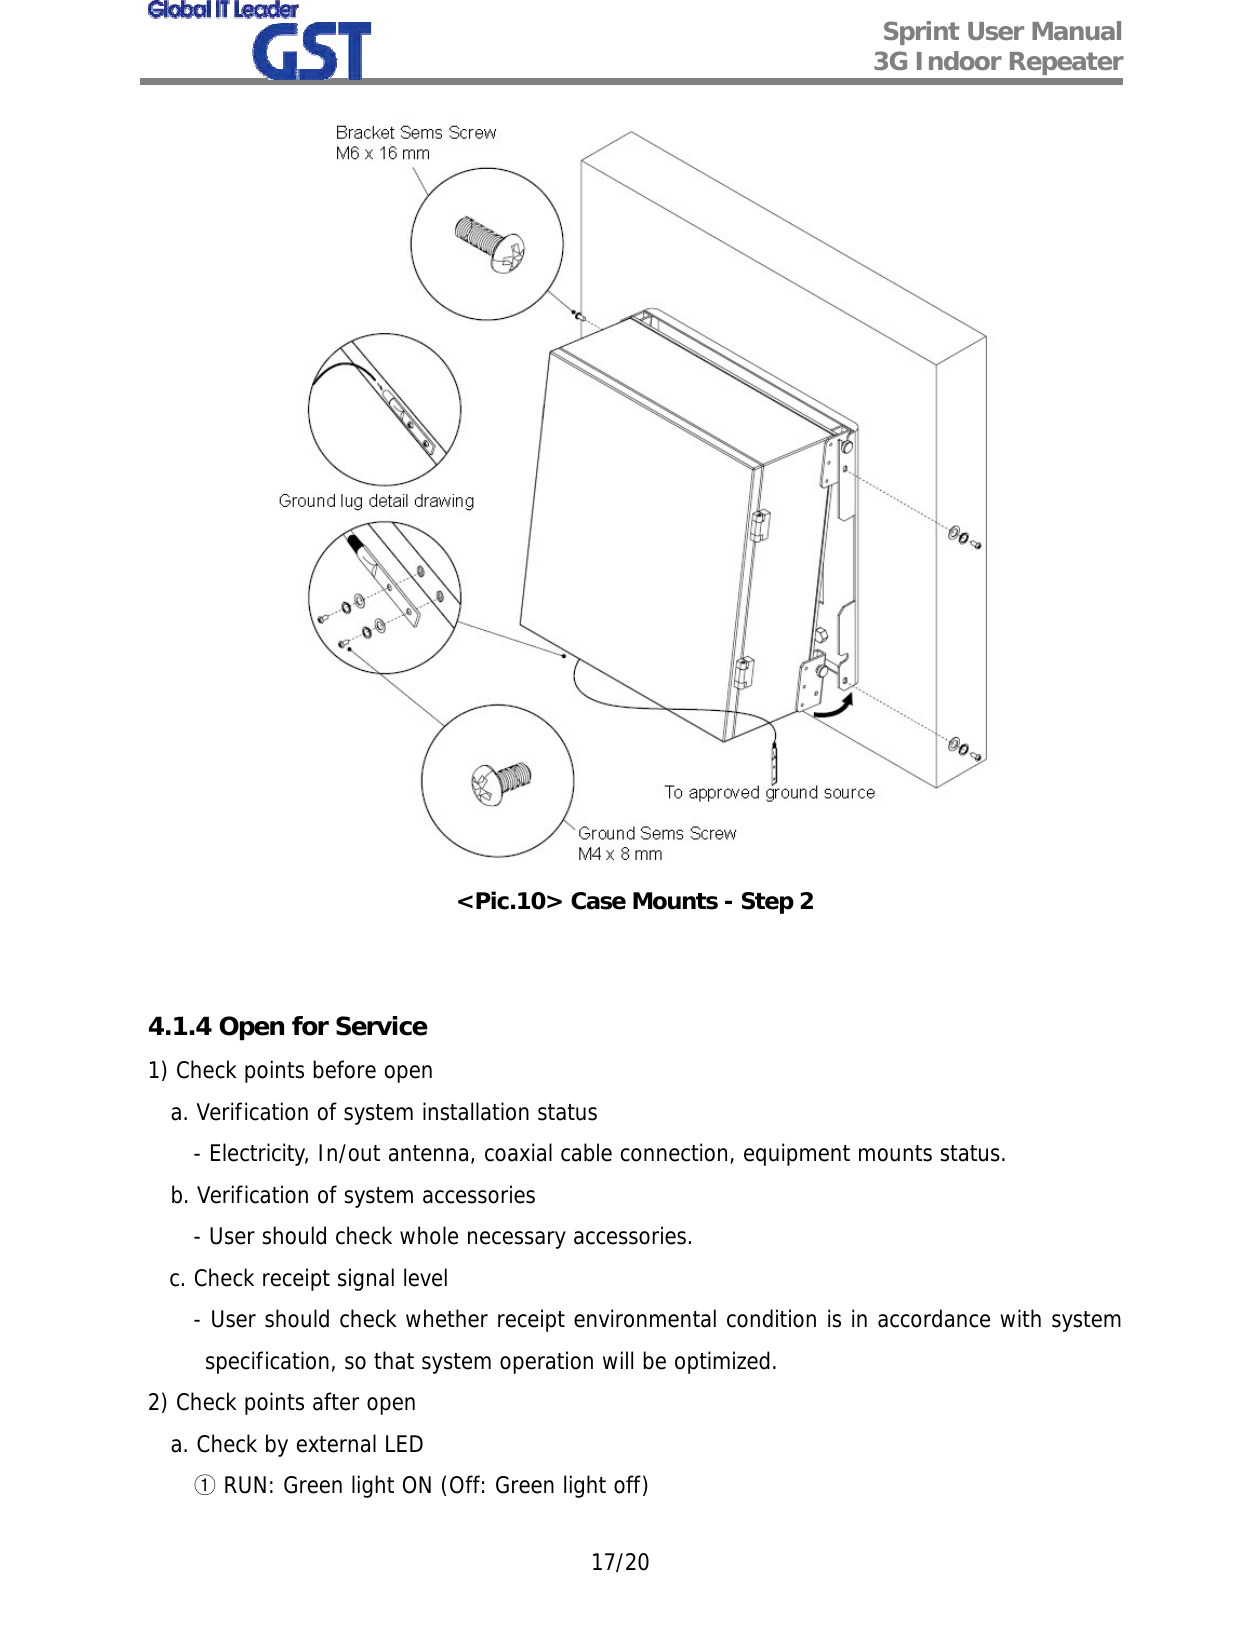  Sprint User Manual 3G Indoor Repeater   17/20  &lt;Pic.10&gt; Case Mounts - Step 2   4.1.4 Open for Service 1) Check points before open a. Verification of system installation status - Electricity, In/out antenna, coaxial cable connection, equipment mounts status. b. Verification of system accessories - User should check whole necessary accessories.    c. Check receipt signal level - User should check whether receipt environmental condition is in accordance with system specification, so that system operation will be optimized. 2) Check points after open a. Check by external LED ① RUN: Green light ON (Off: Green light off) 